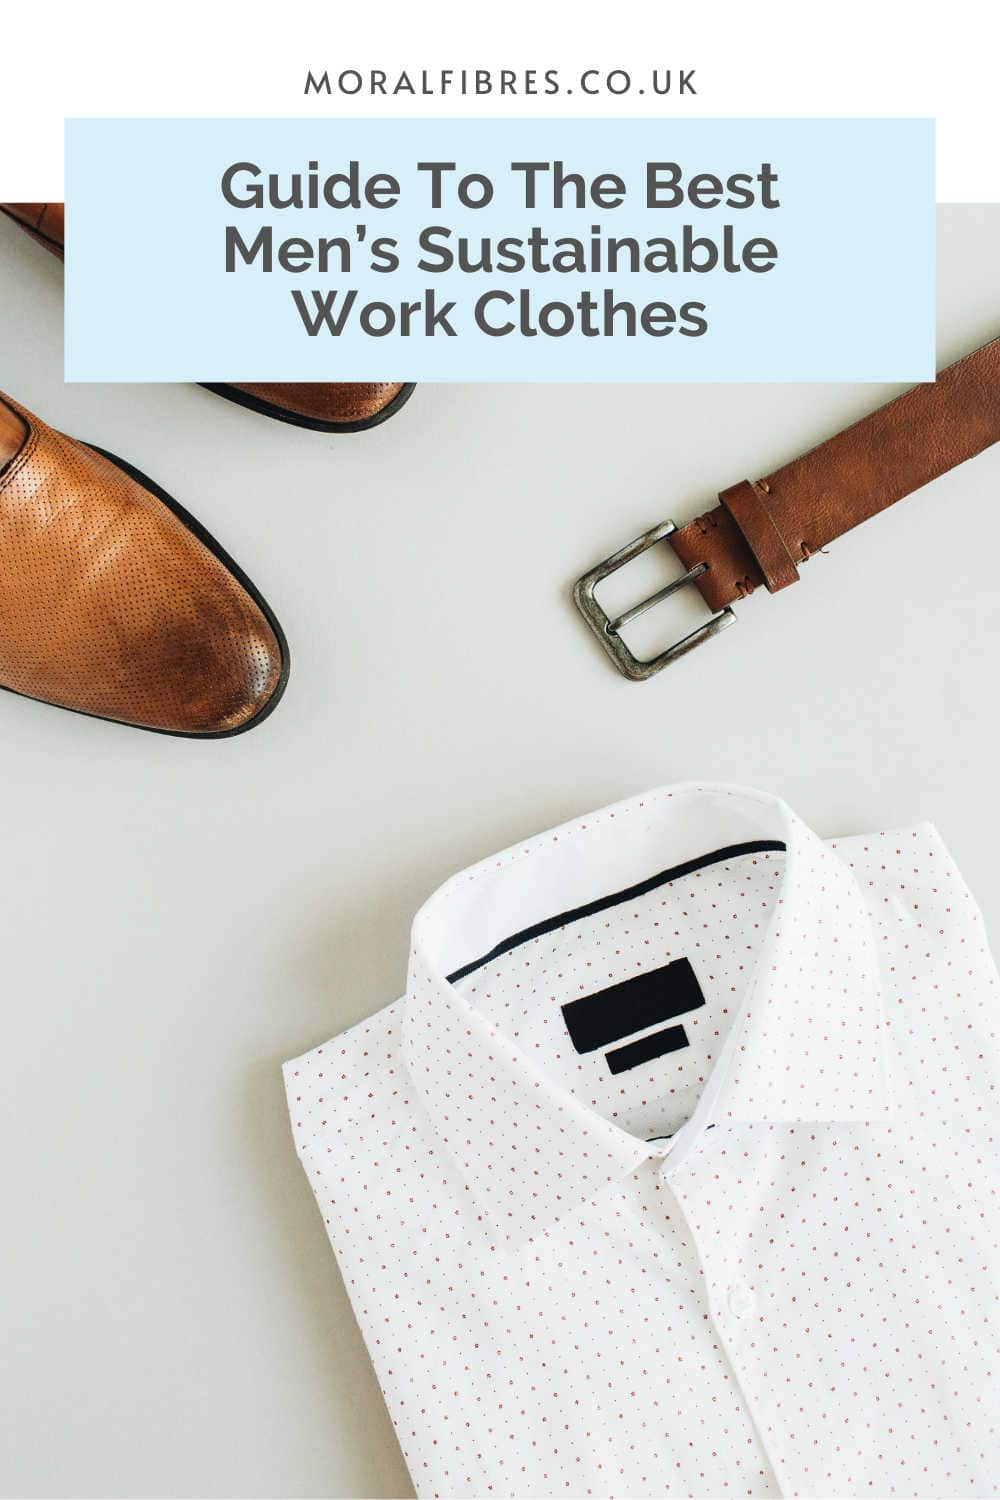 Smart white dress shirt folded next to brown shoes and a belt, with a blue text box that reads guide to the best men's sustainable work clothes.